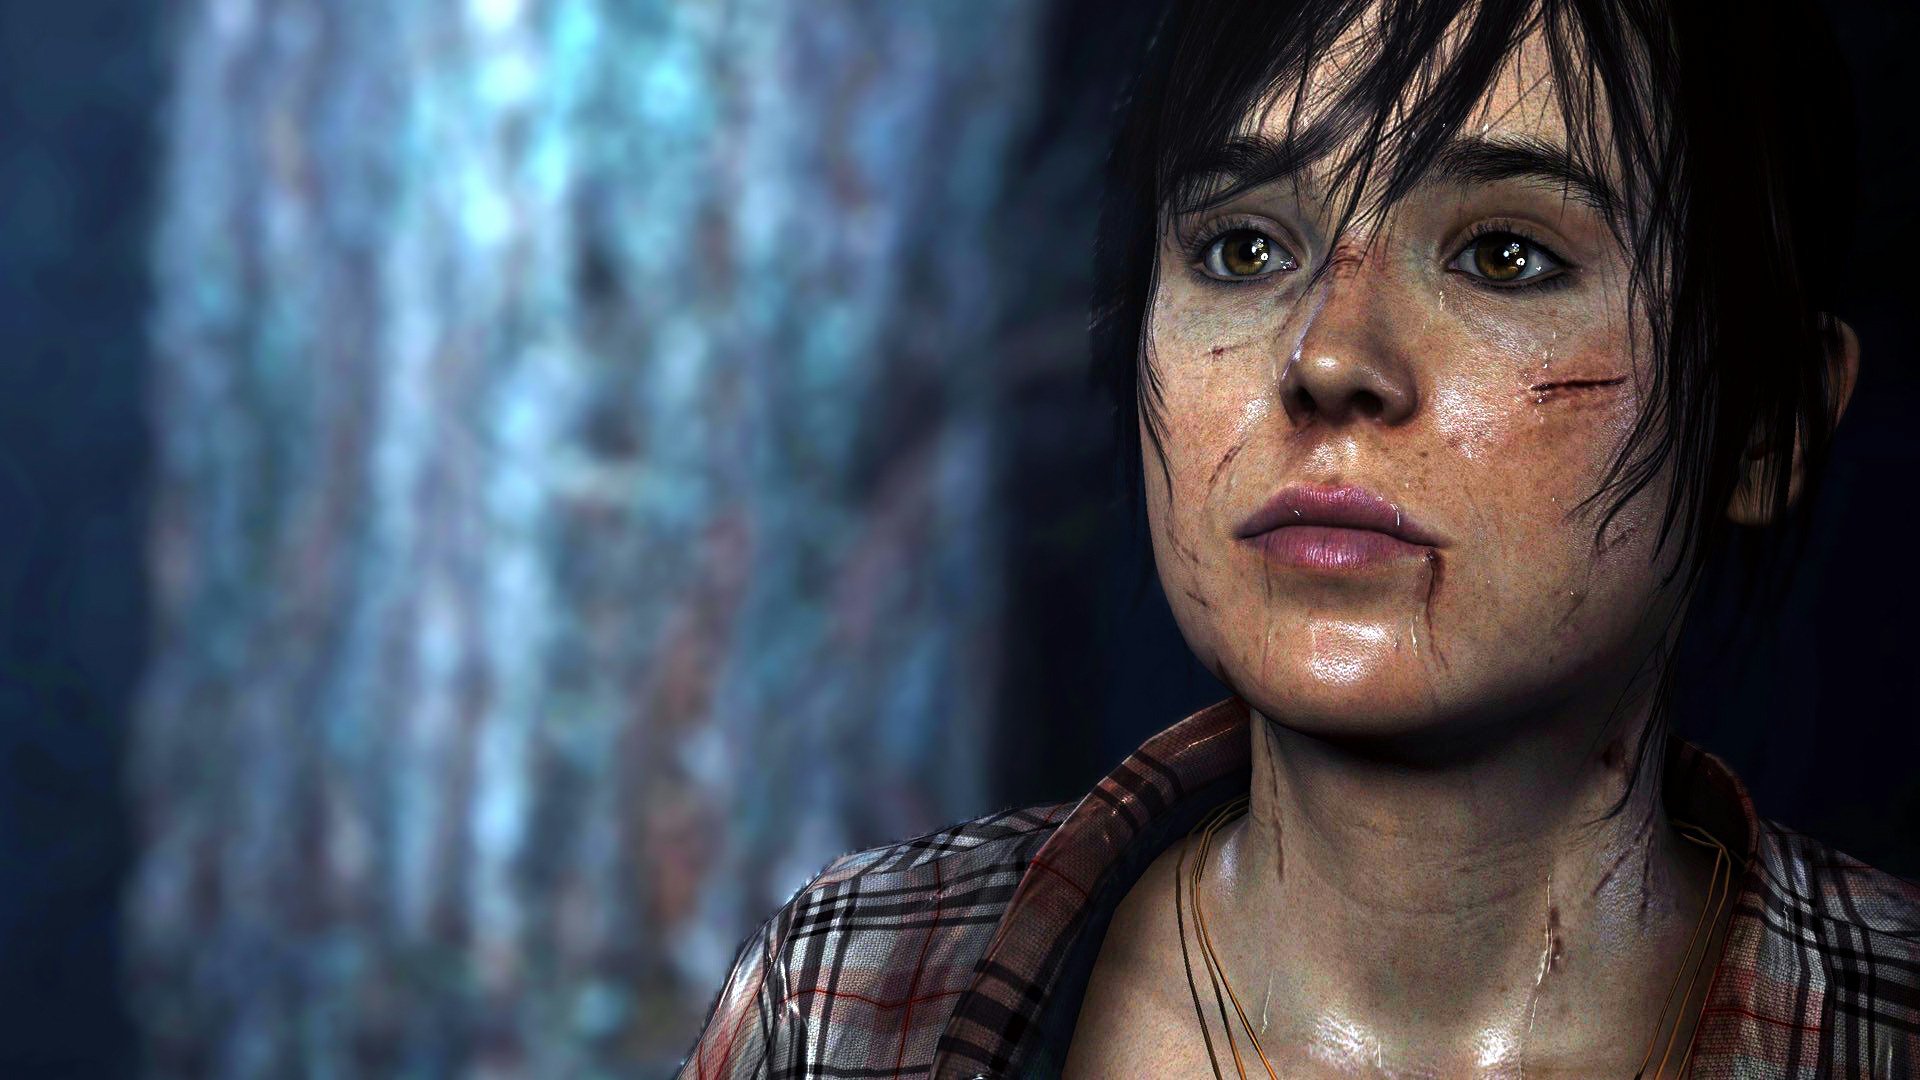 Beyond: Two Souls are being re-released on PS4 Stevivor